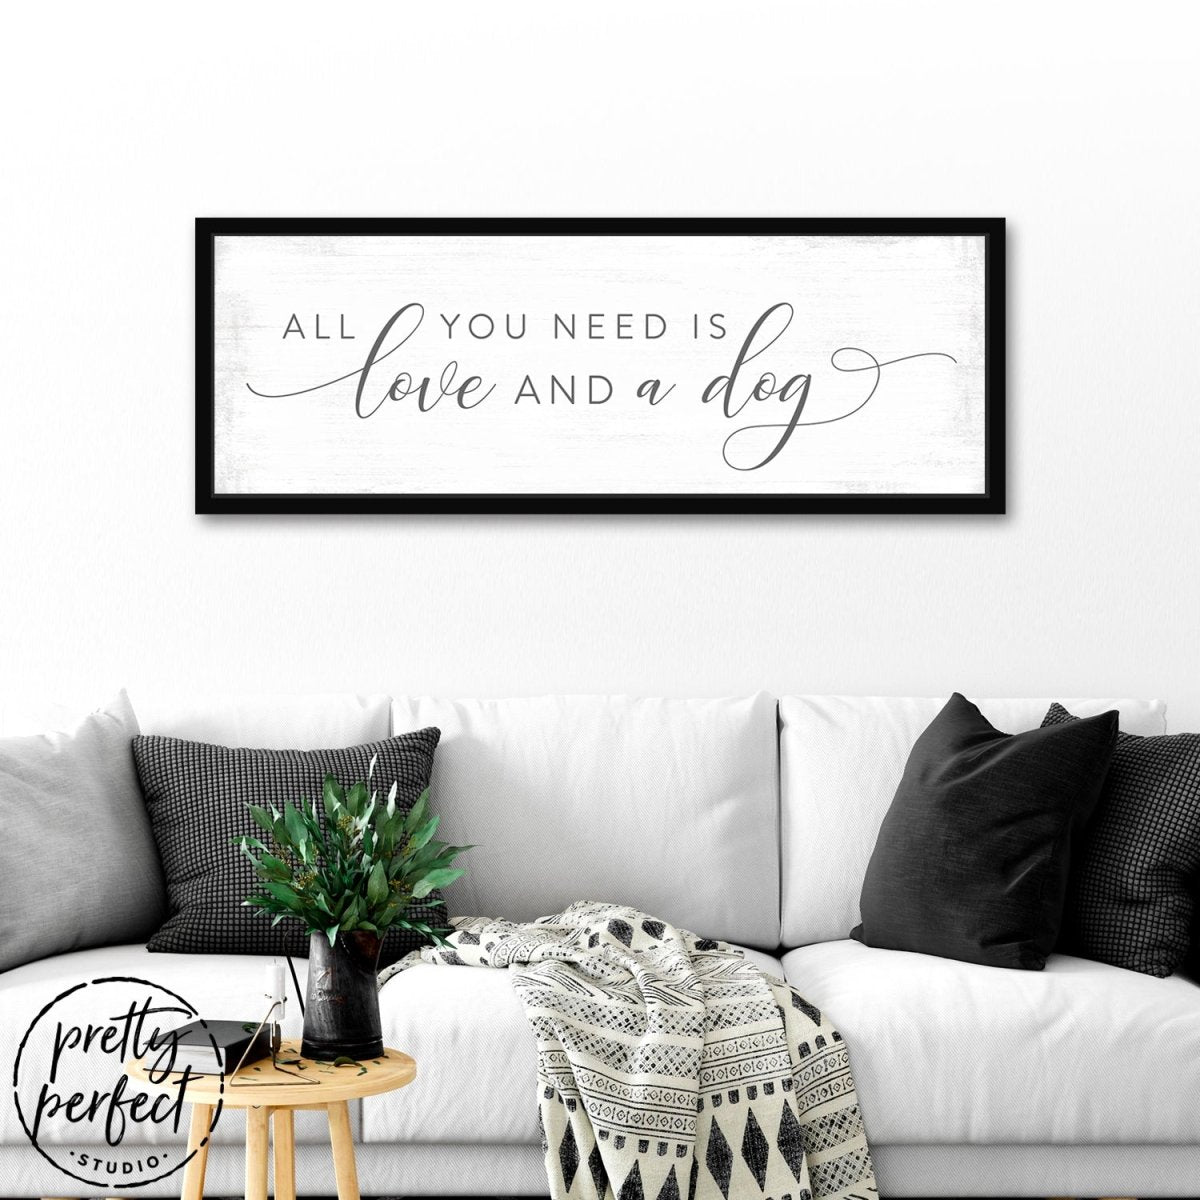 All You Need Is Love And A Dog Canvas Sign in Family Room - Pretty Perfect Studio